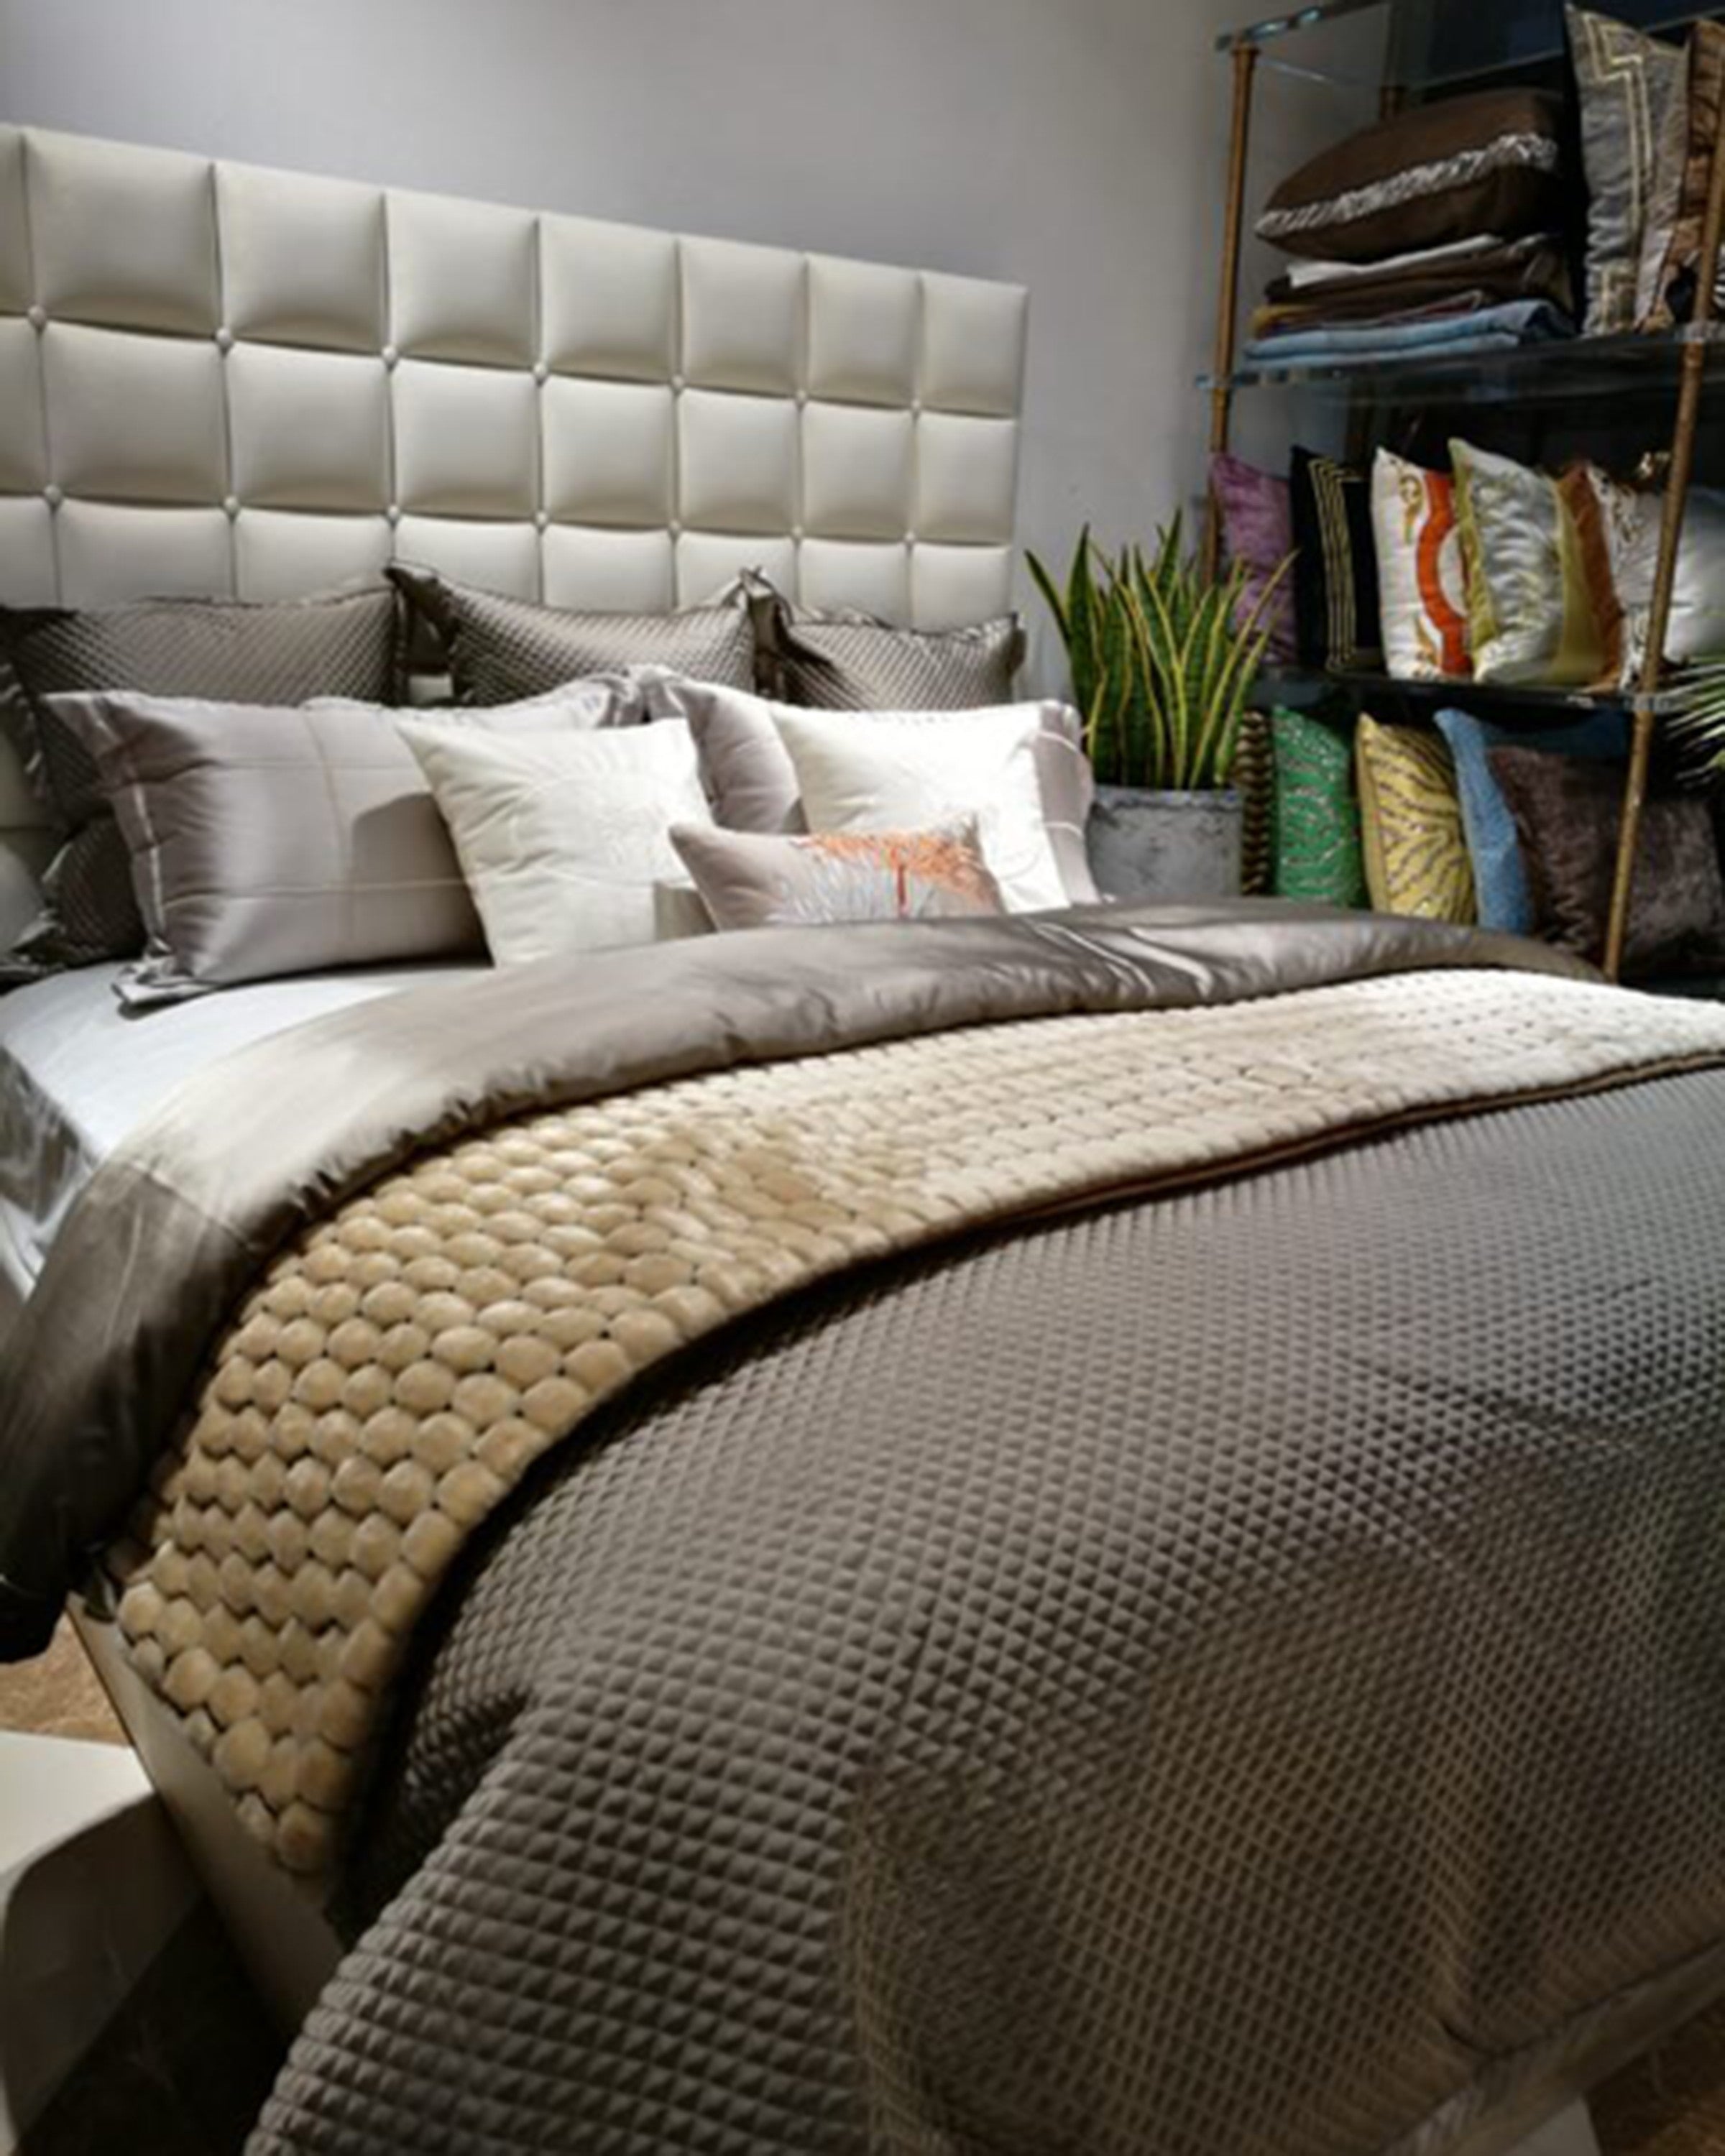 Luxury bed sets with pillows